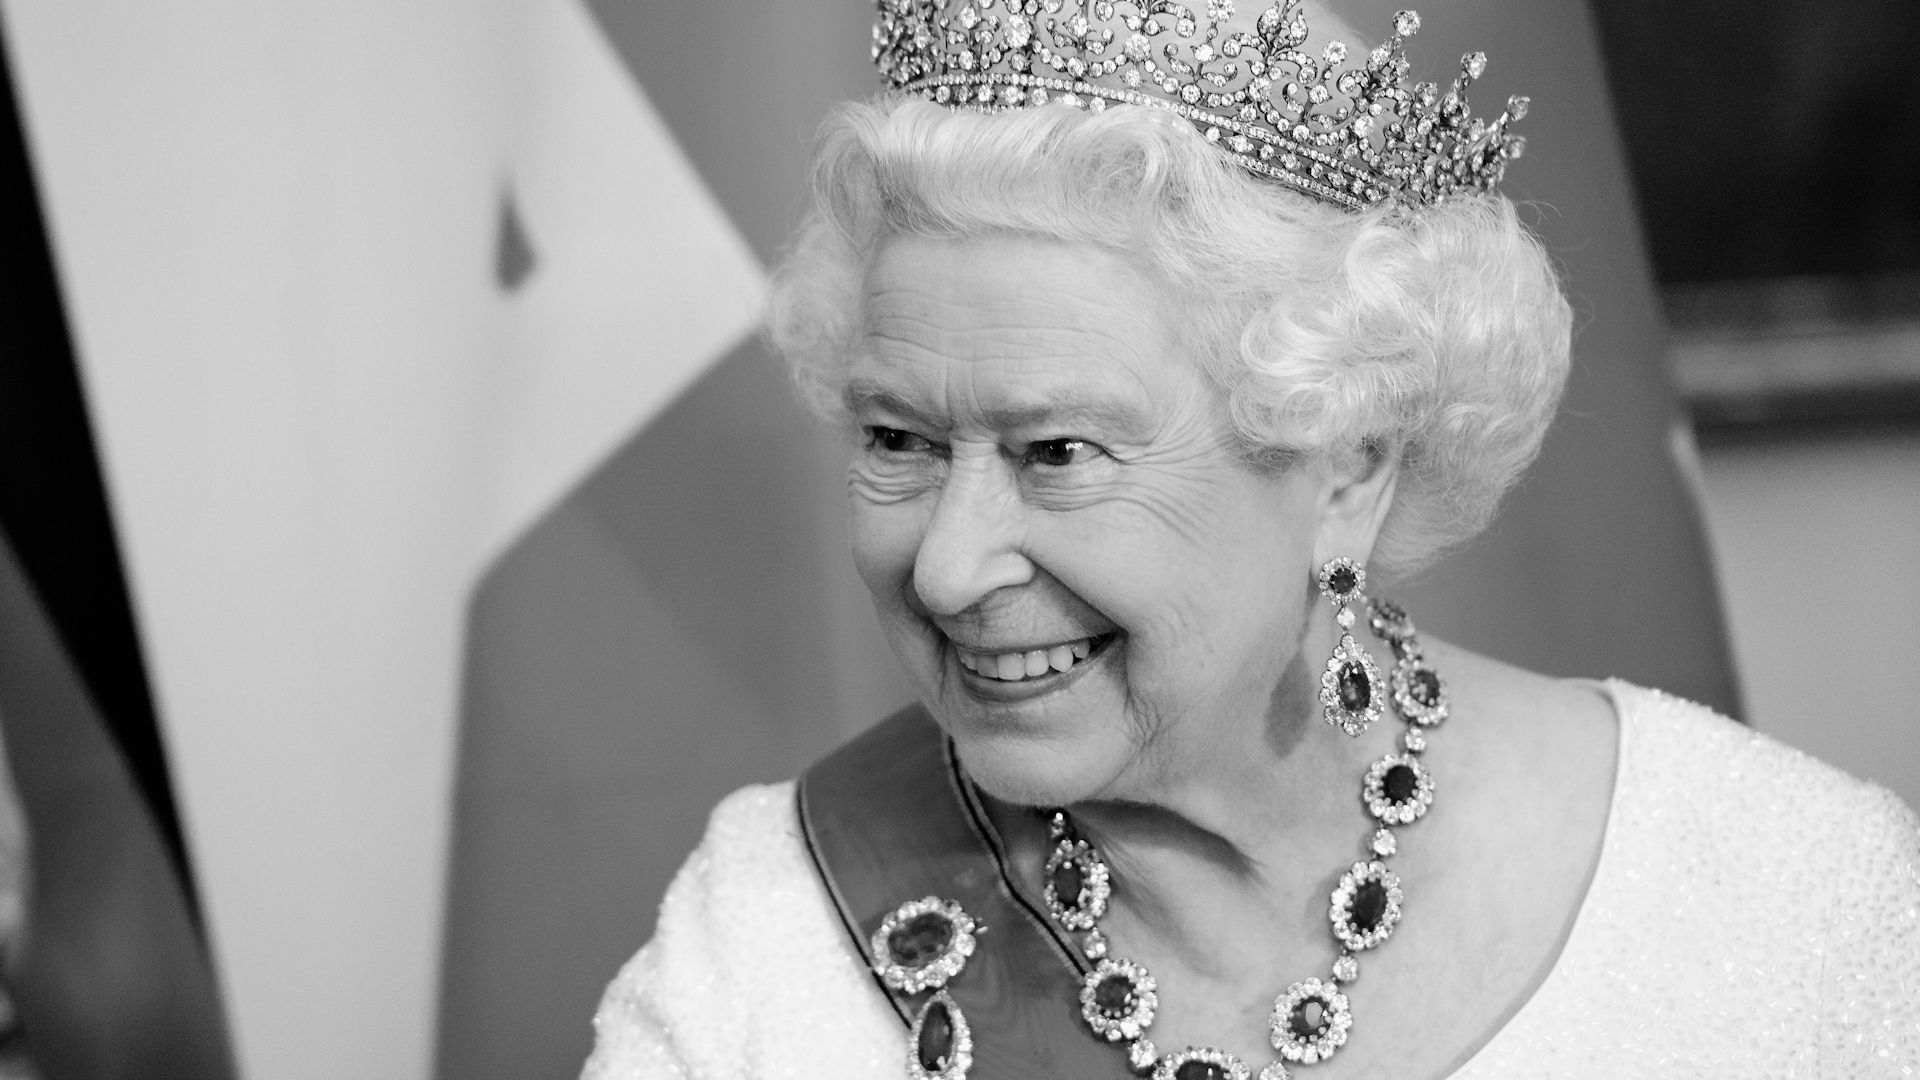 Politics, celebrities and landmarks: This is how the world mourns the Queen